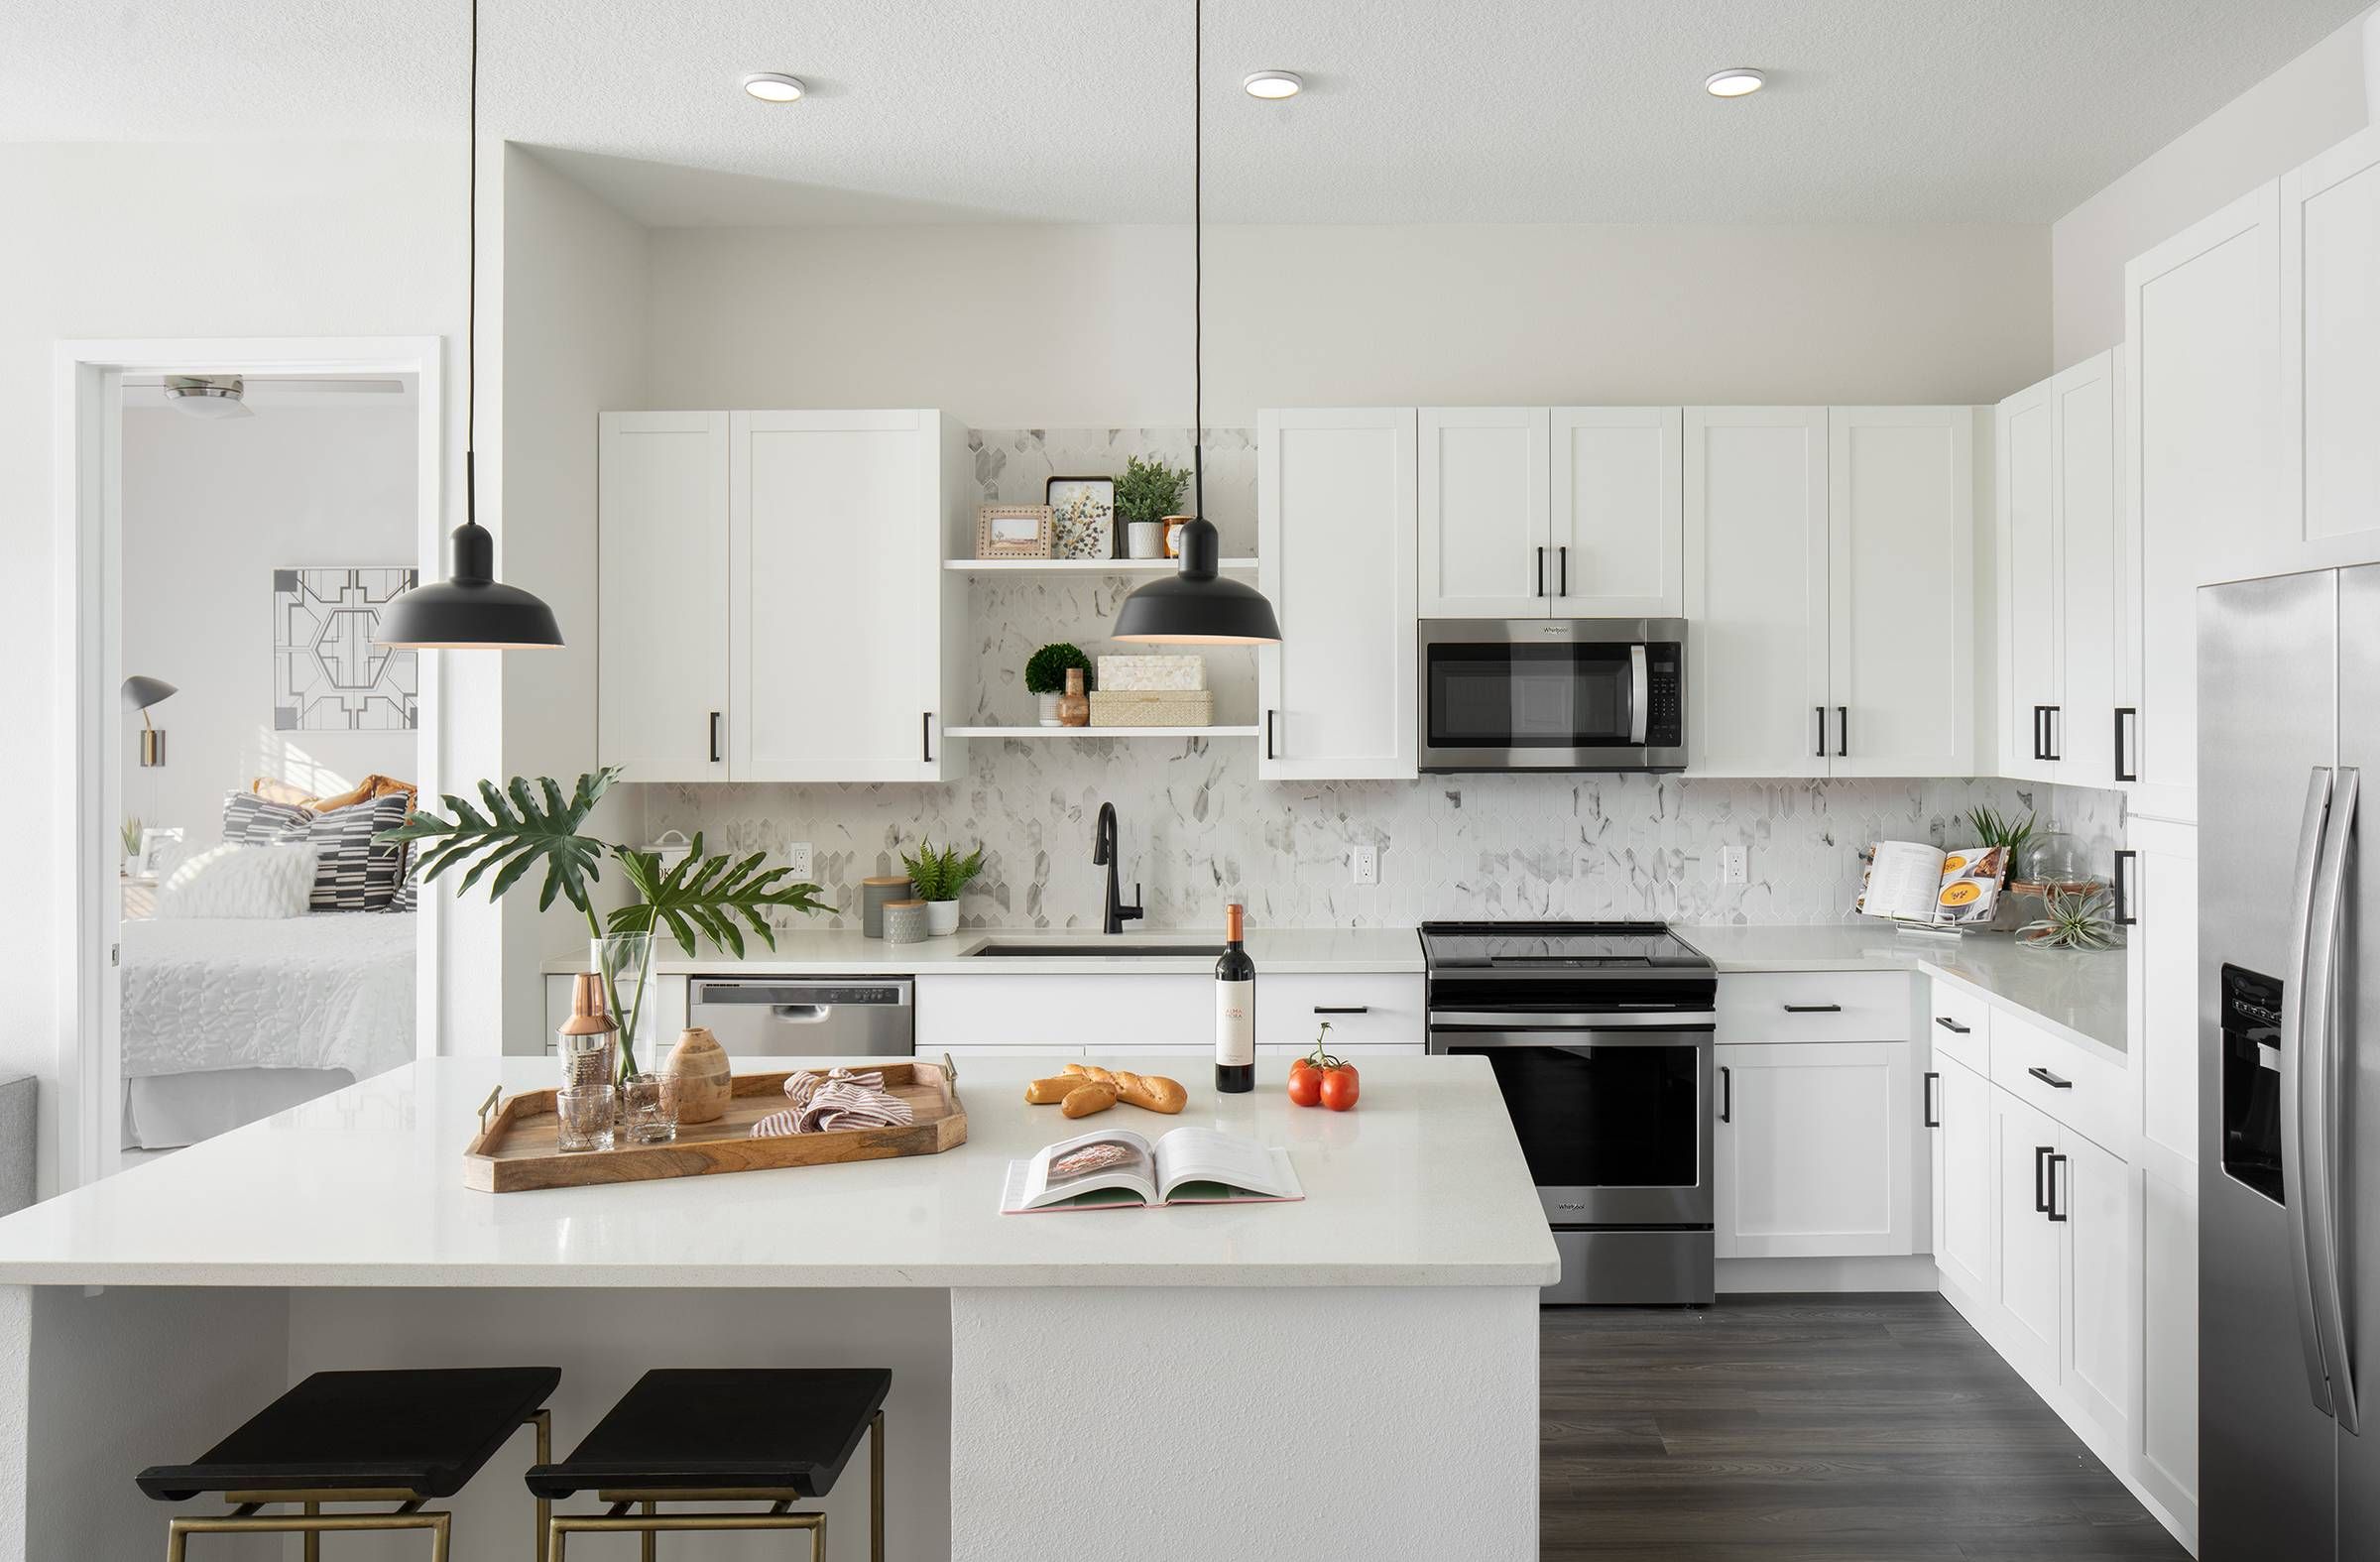 Modern kitchen in Alta Winter Garden featuring white cabinetry, stainless steel appliances, and a marble-patterned backsplash illuminated by pendant lights.